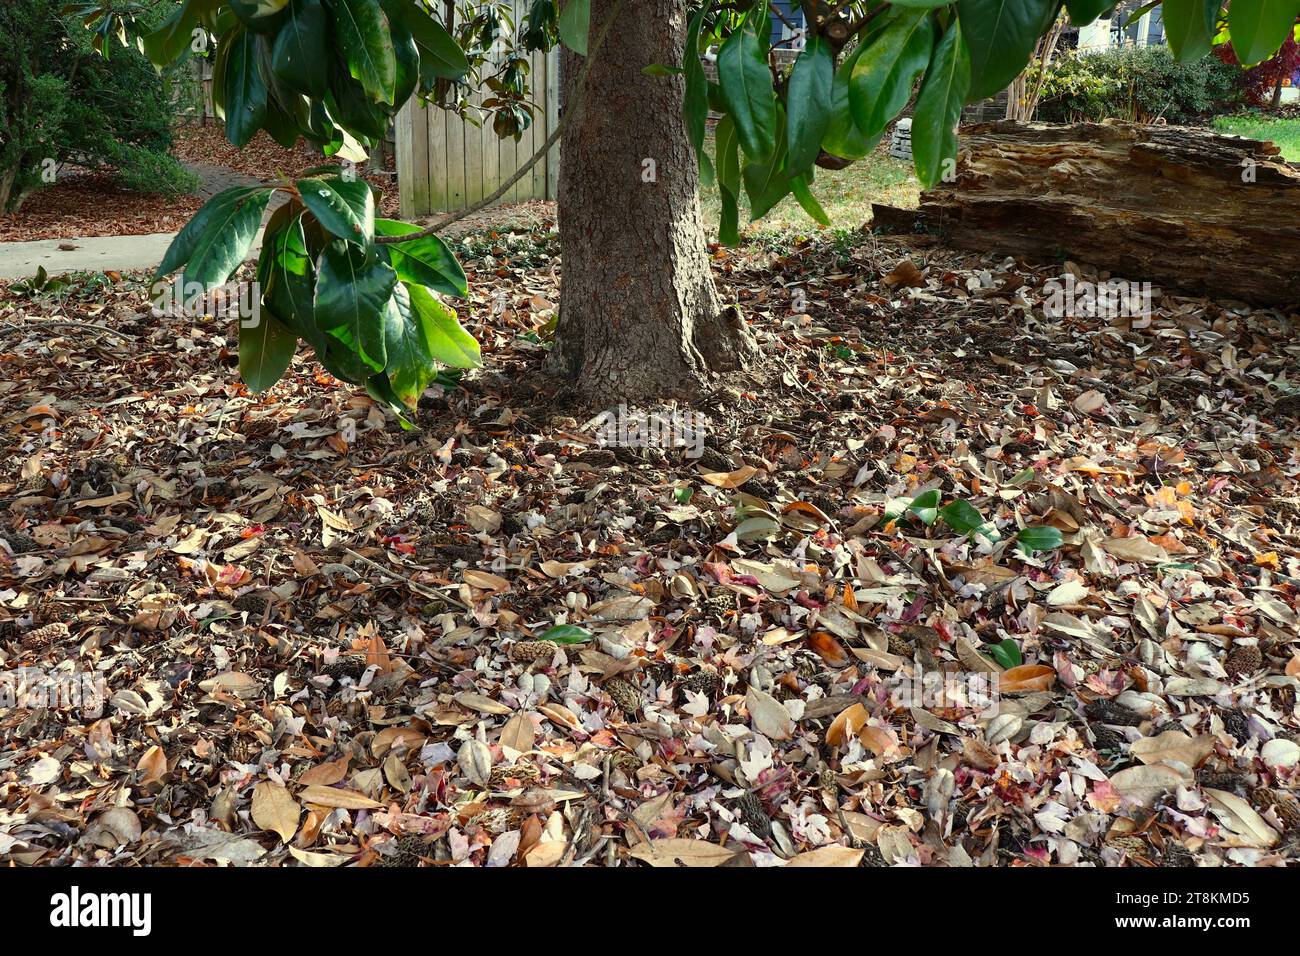 Natural Fall Potpourri of Fallen Leaves and Flower Cones on the Ground Stock Photo